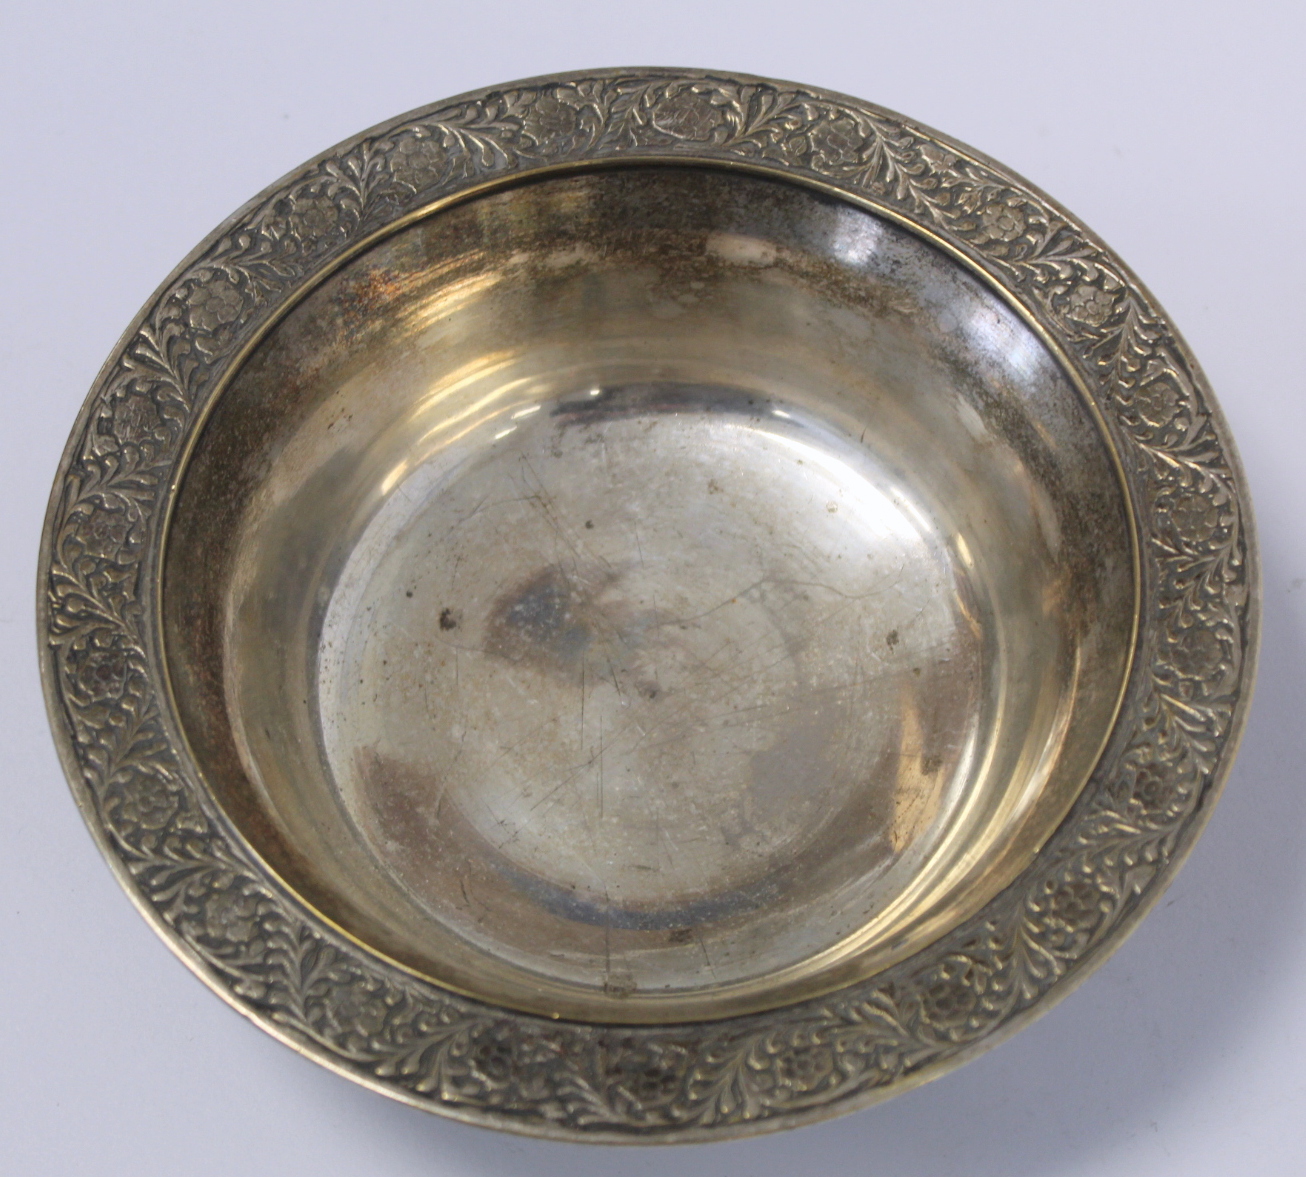 Oriental silvered circular brass bowl with engraved floral and foliate decoration, 16cm diam. - Image 5 of 9